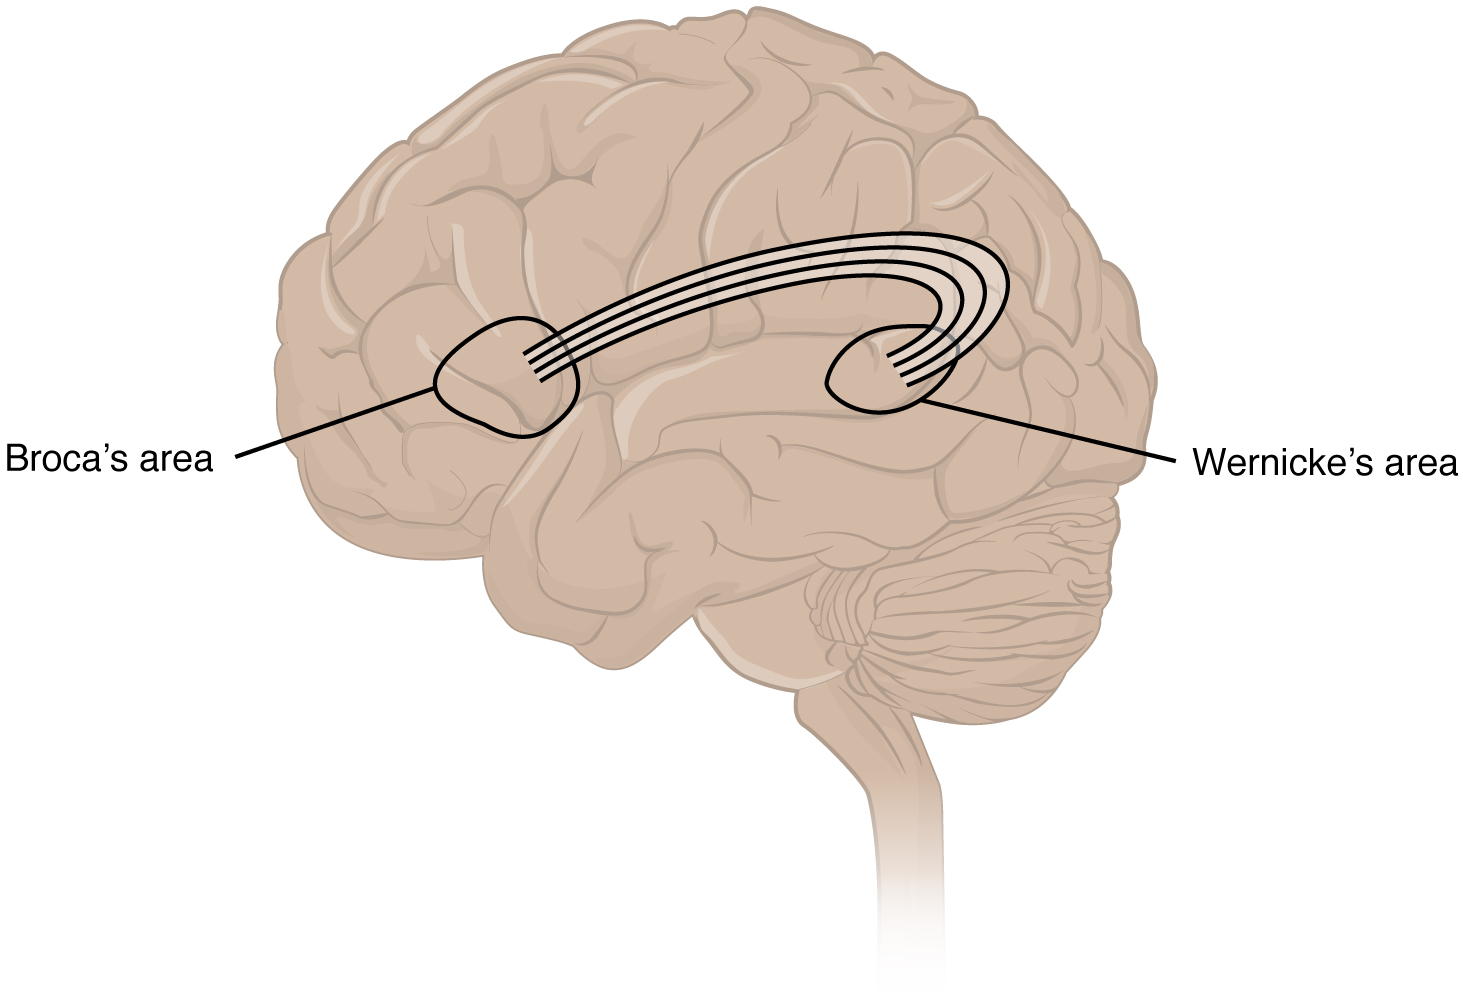 This figure shows the brain. Two labels mark the Broca’s and Wernicke’s areas.